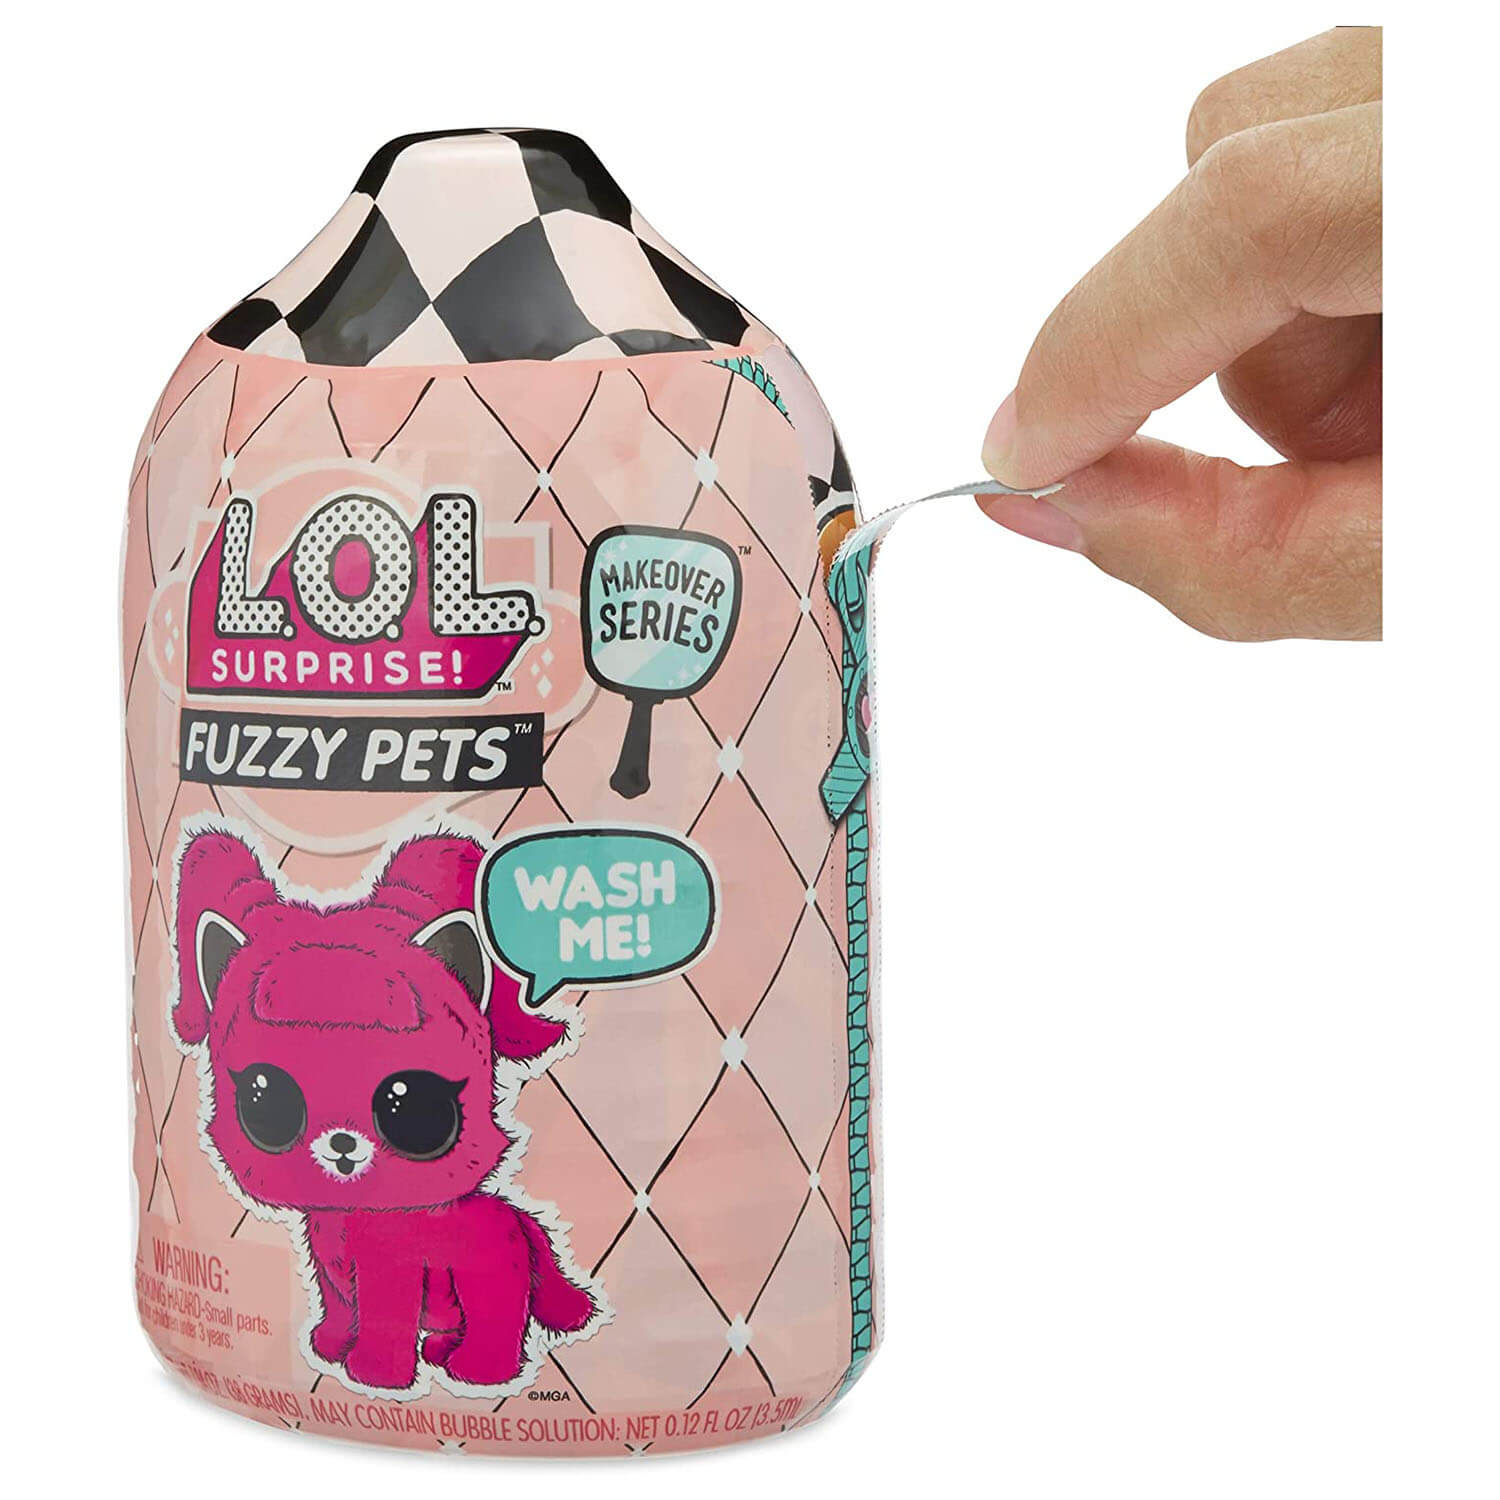 Front view of the L.O.L. Surprise Fuzzy Pets package.